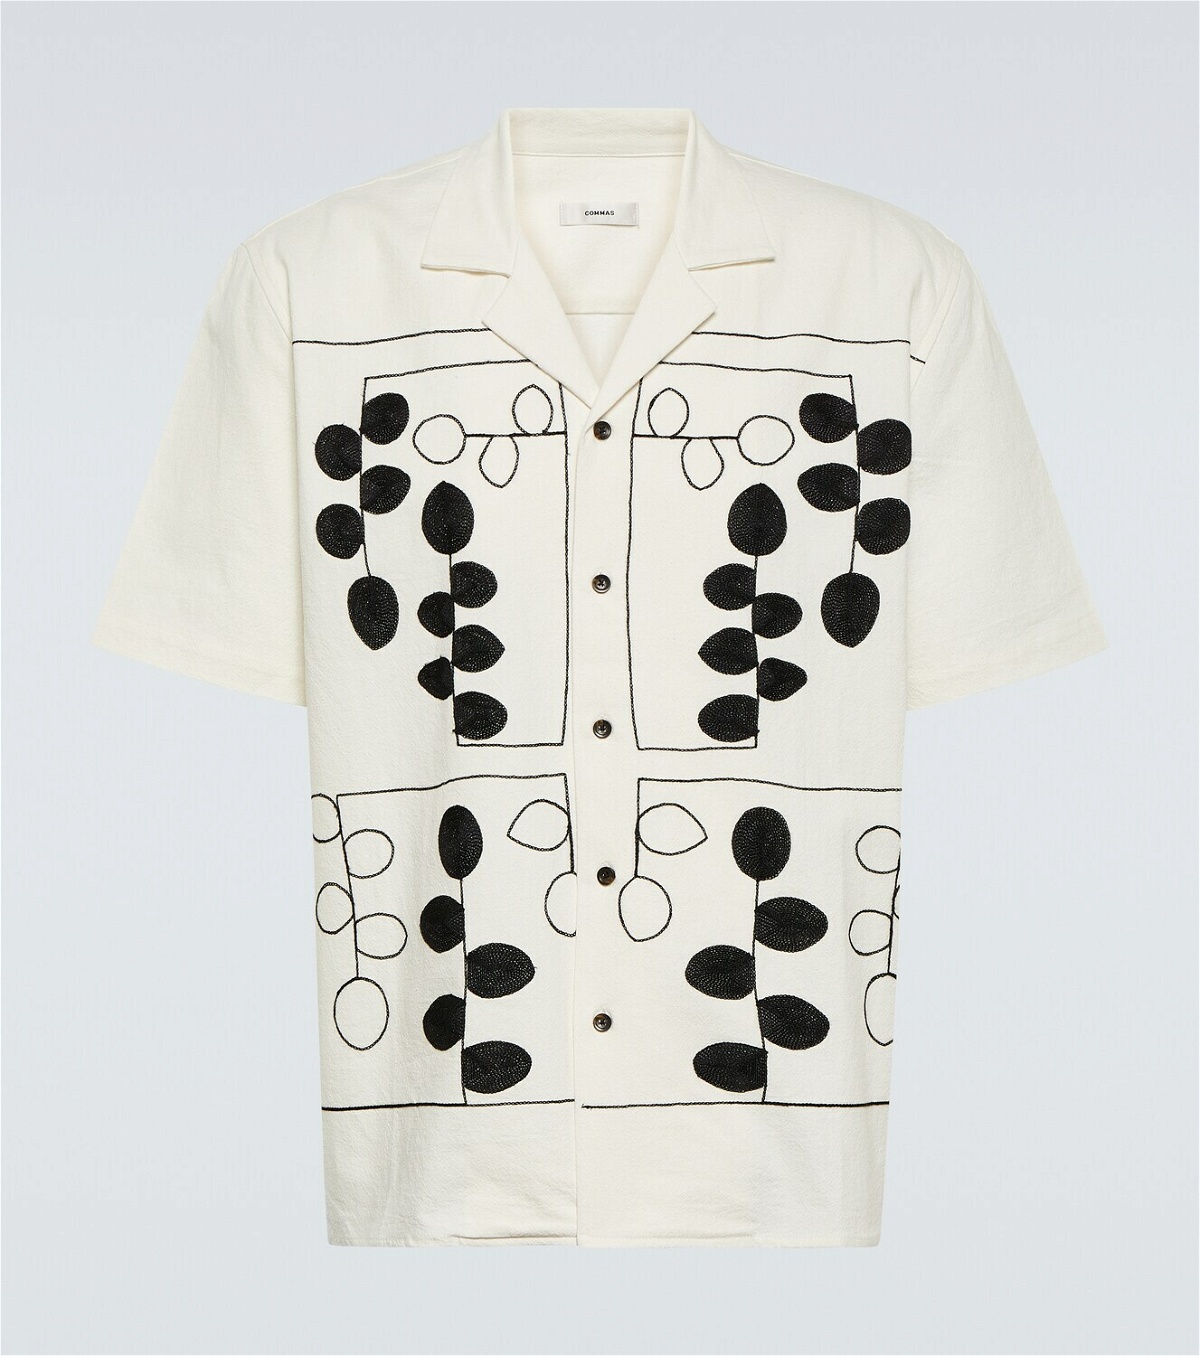 Commas Embroidered camp shirt